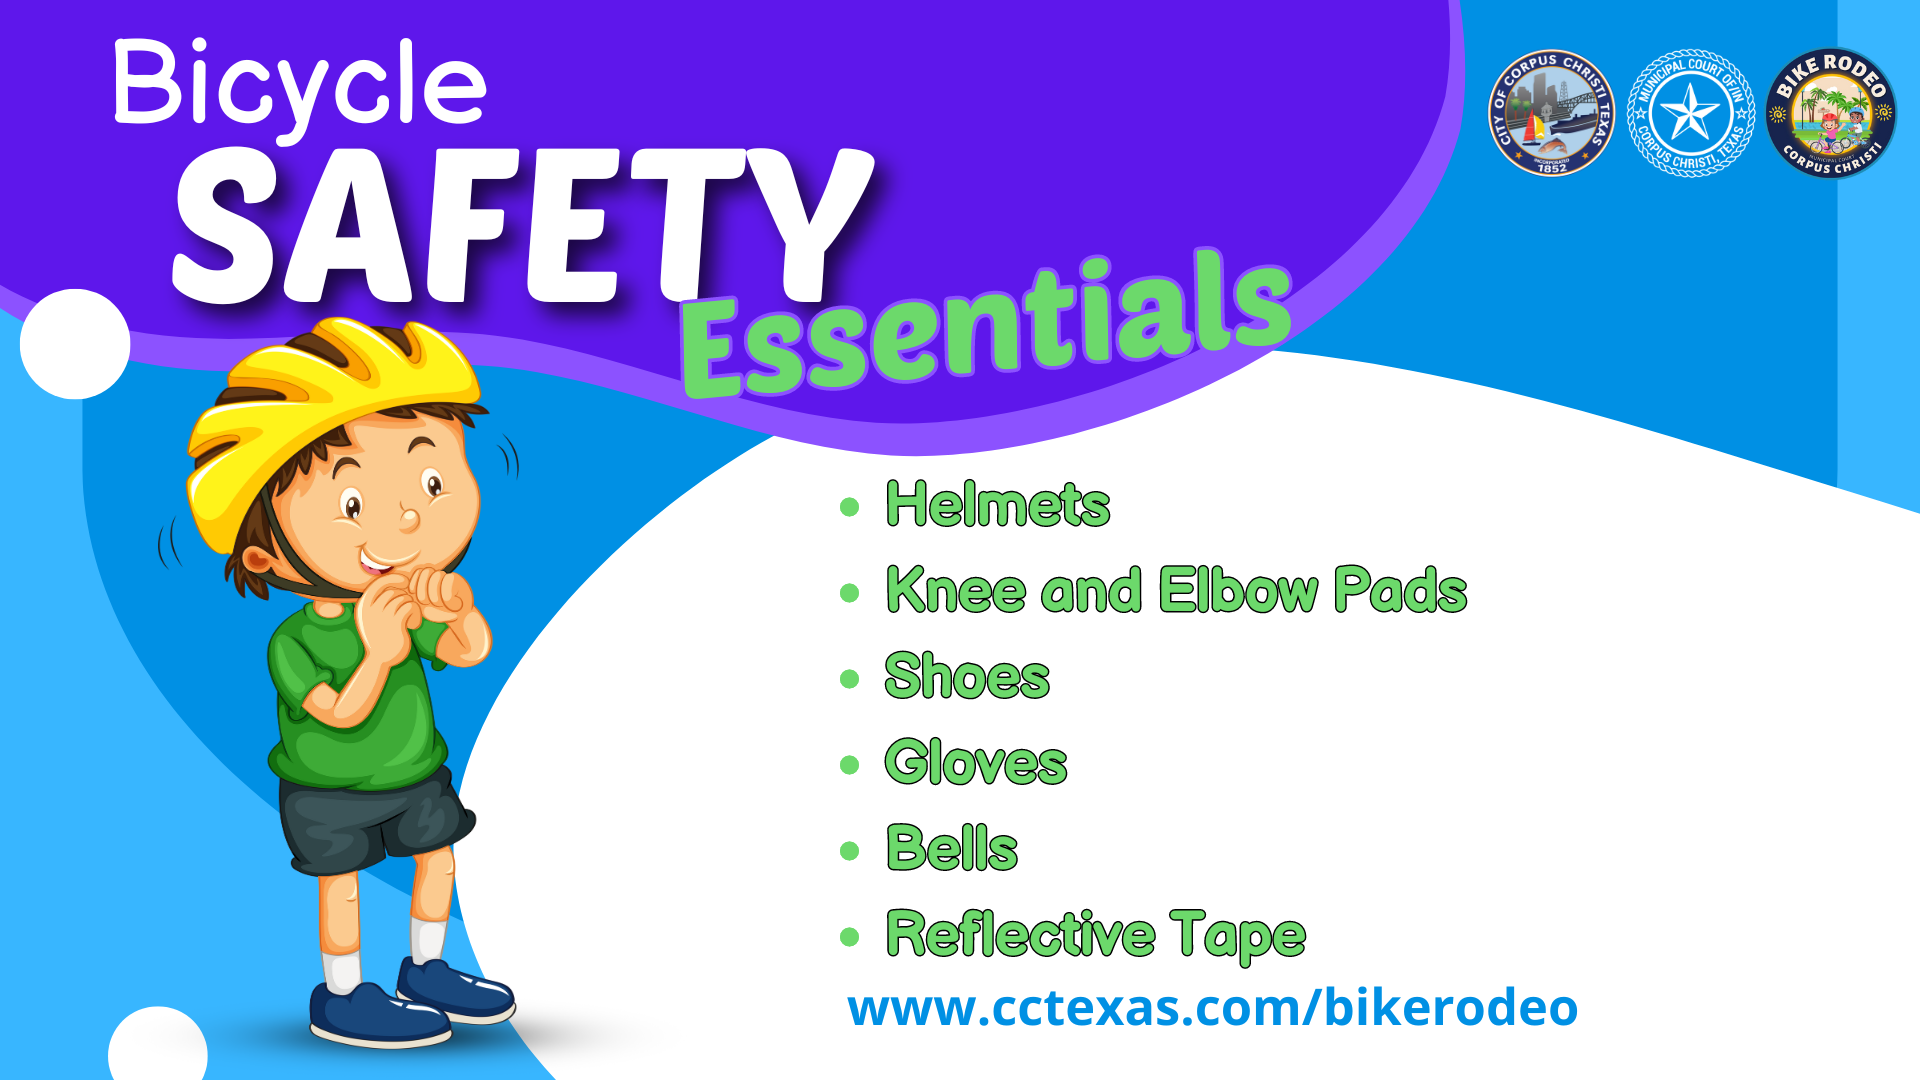 Bicycle Safety Essentials